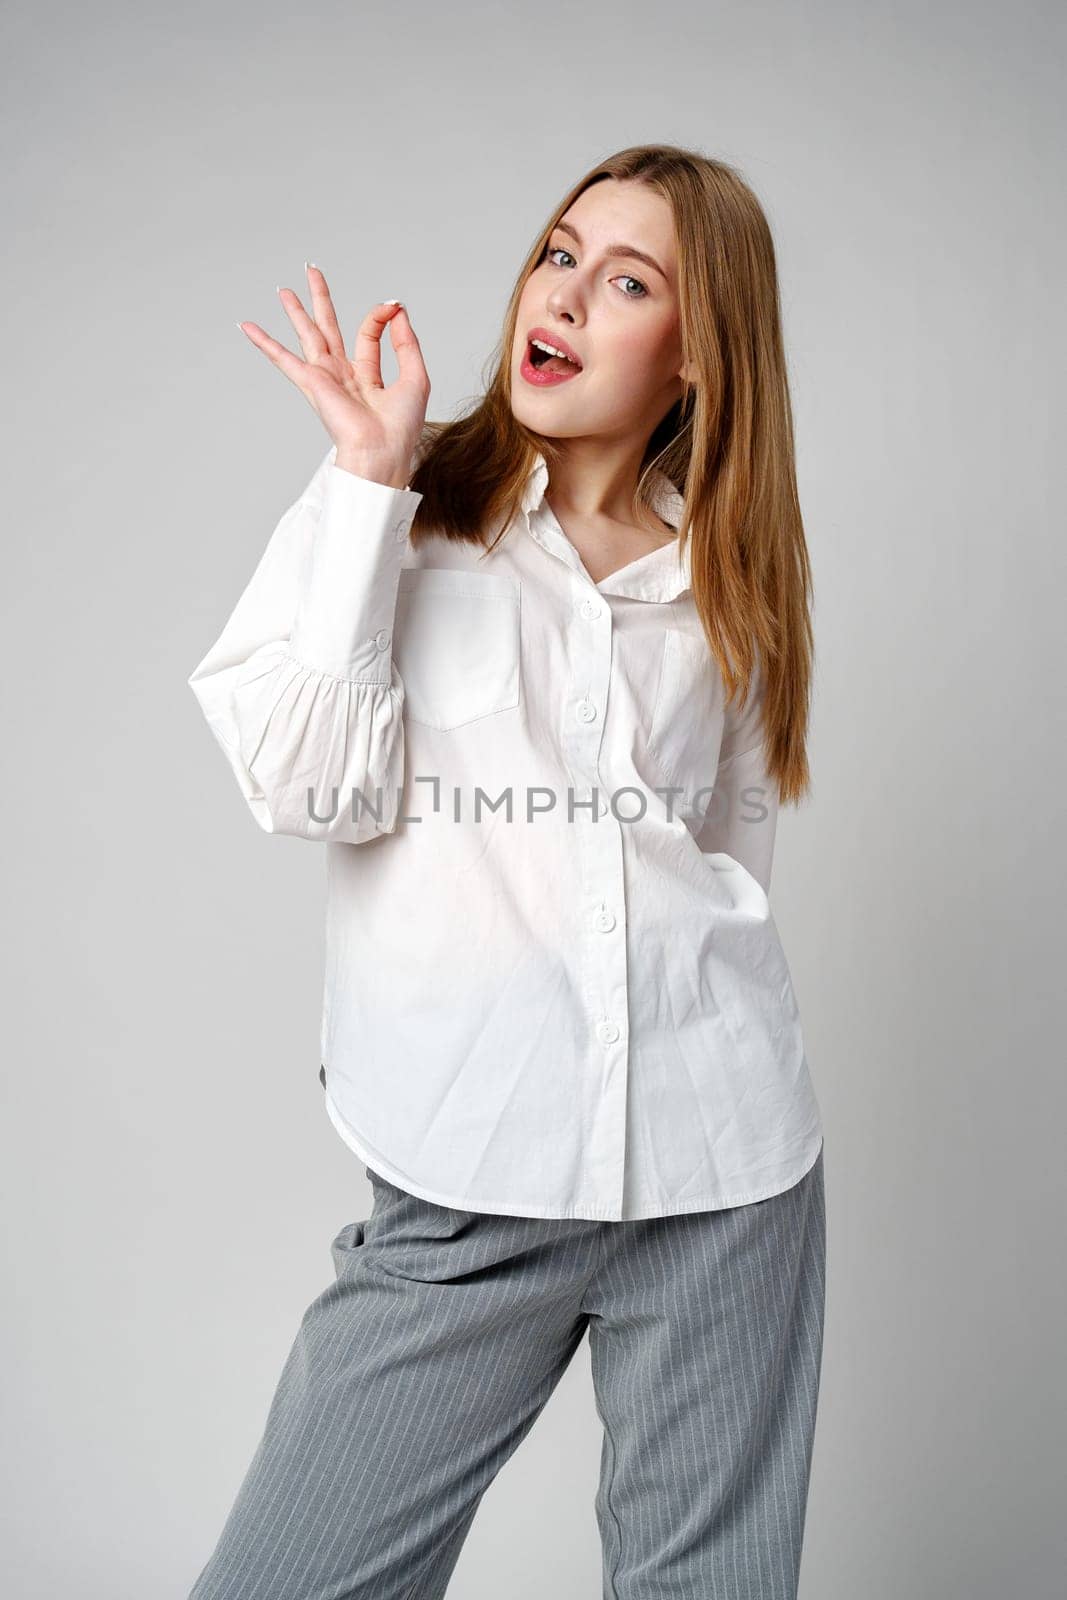 Young Woman Gesturing OK Sign With Hand Against a Neutral Background in studio